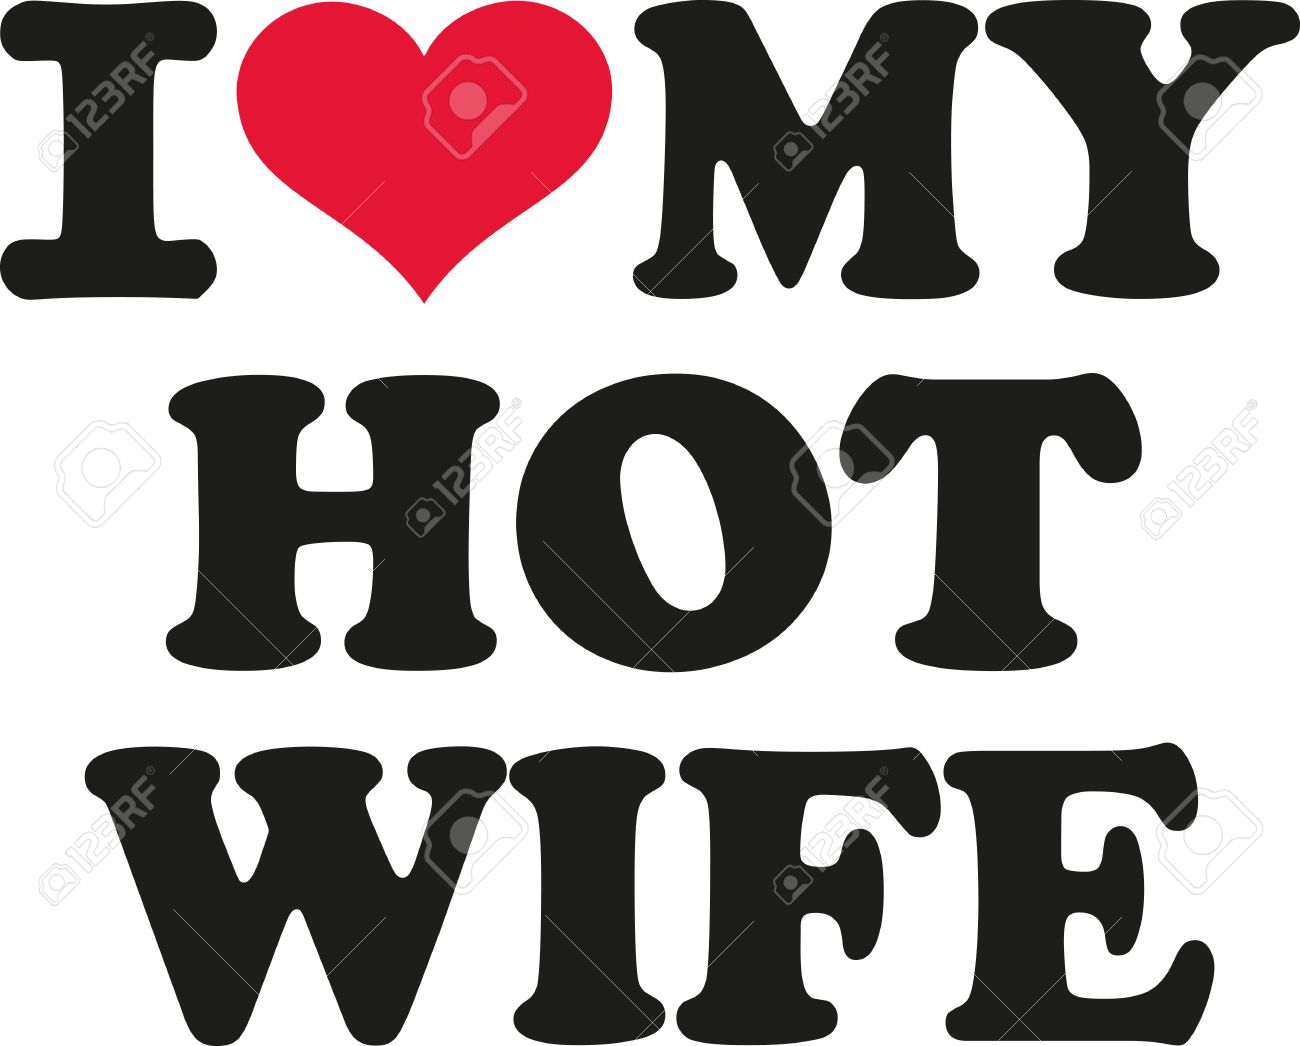 dawn gaede recommends free hot wife pictures pic